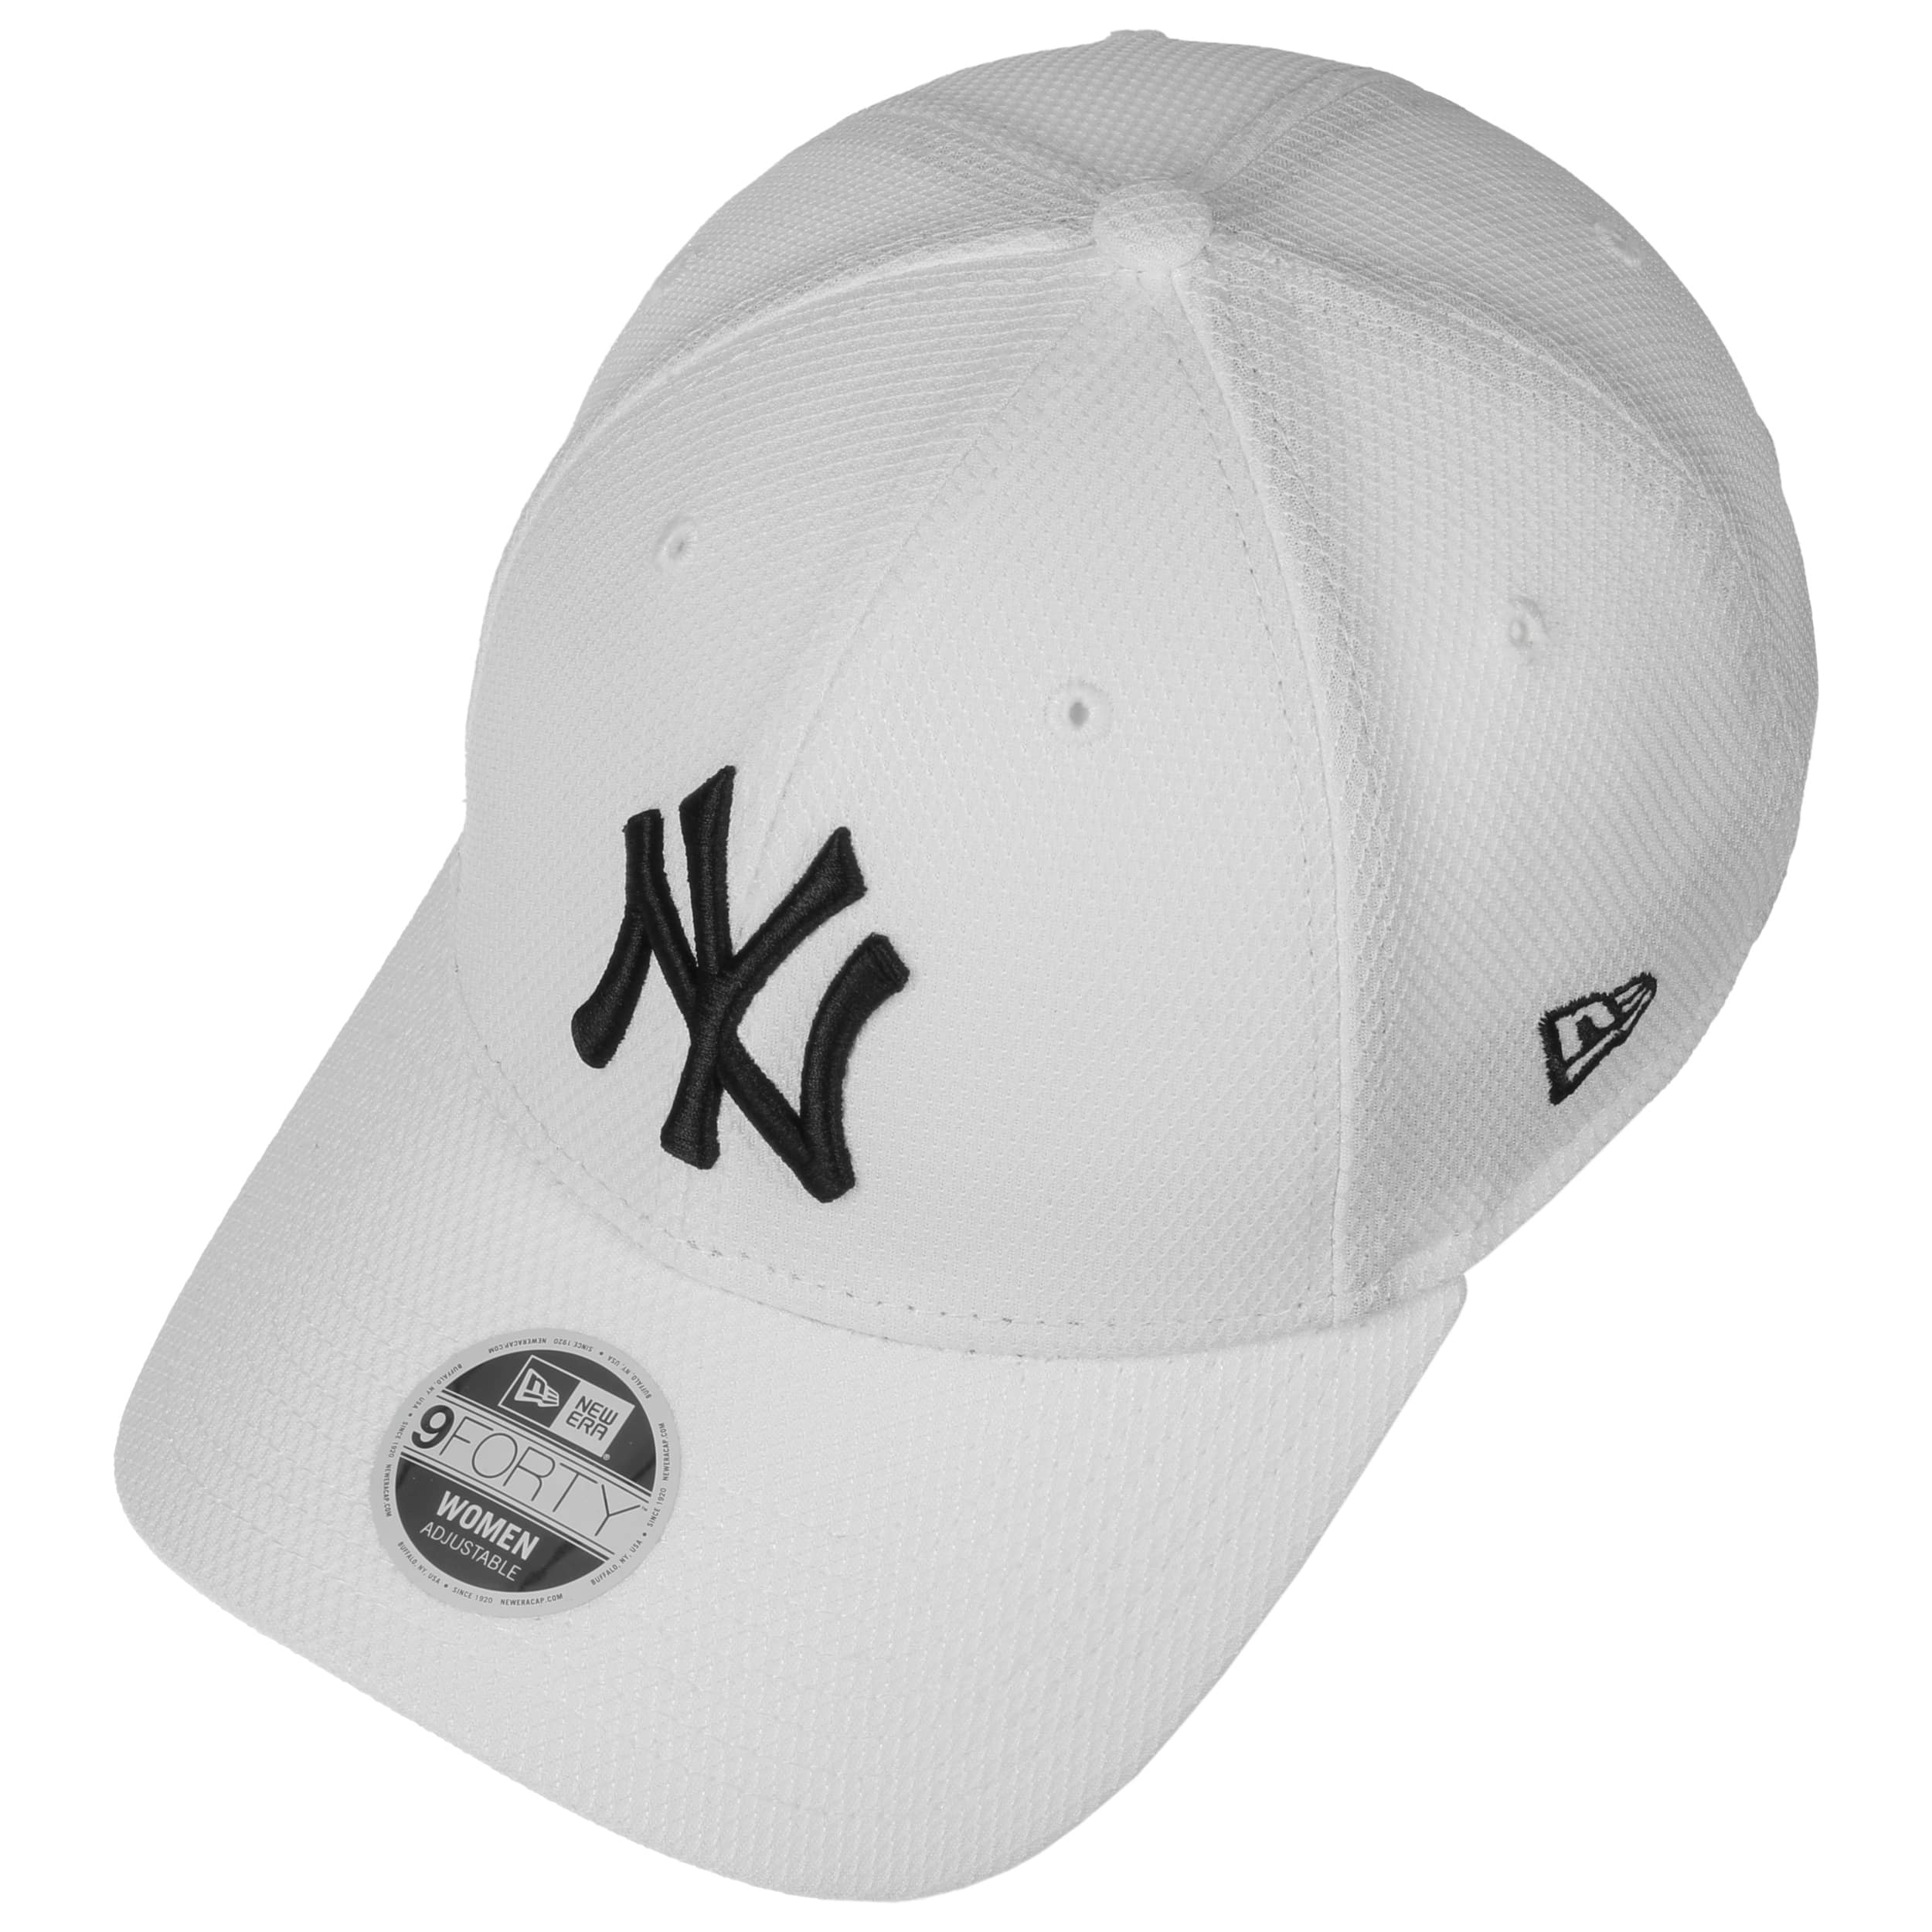 Official New Era New York Yankees Womens White 9FORTY Cap A5876_282  A5876_282 A5876_282